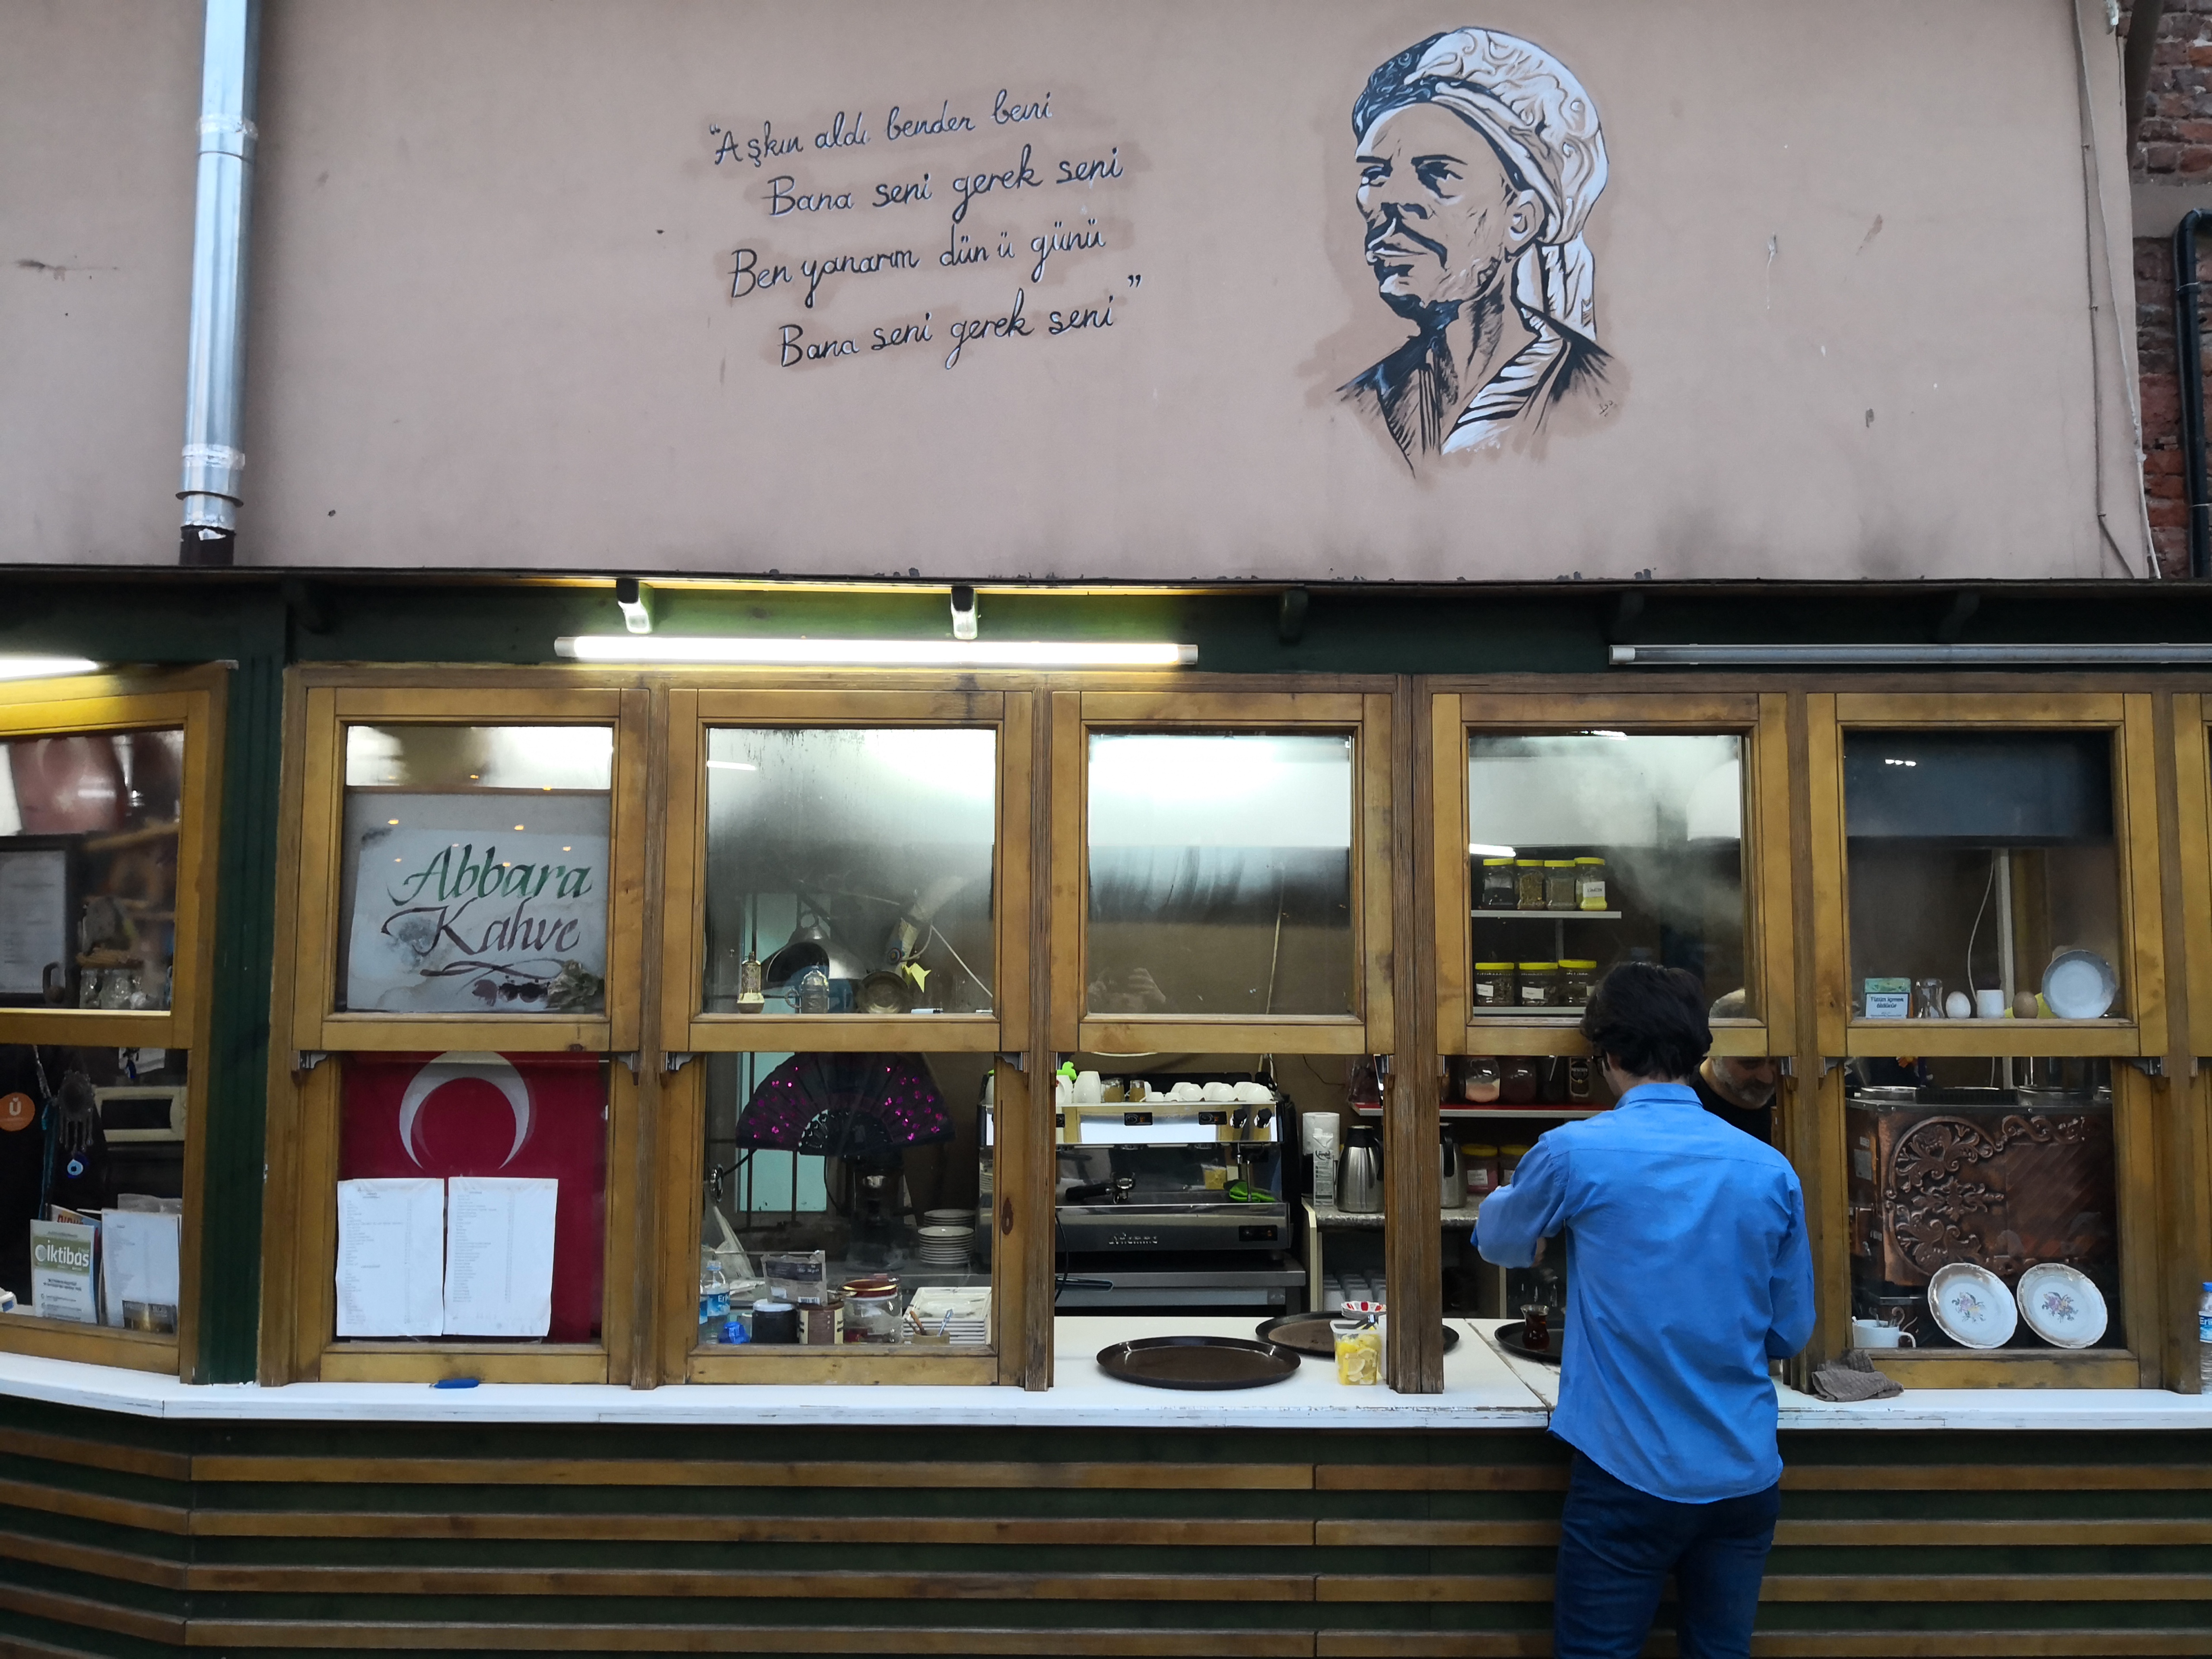 The likeness of Yunus Emre and two famous lines of his poetry adorn the wall of a teahouse in the Uskudar district of Istanbul